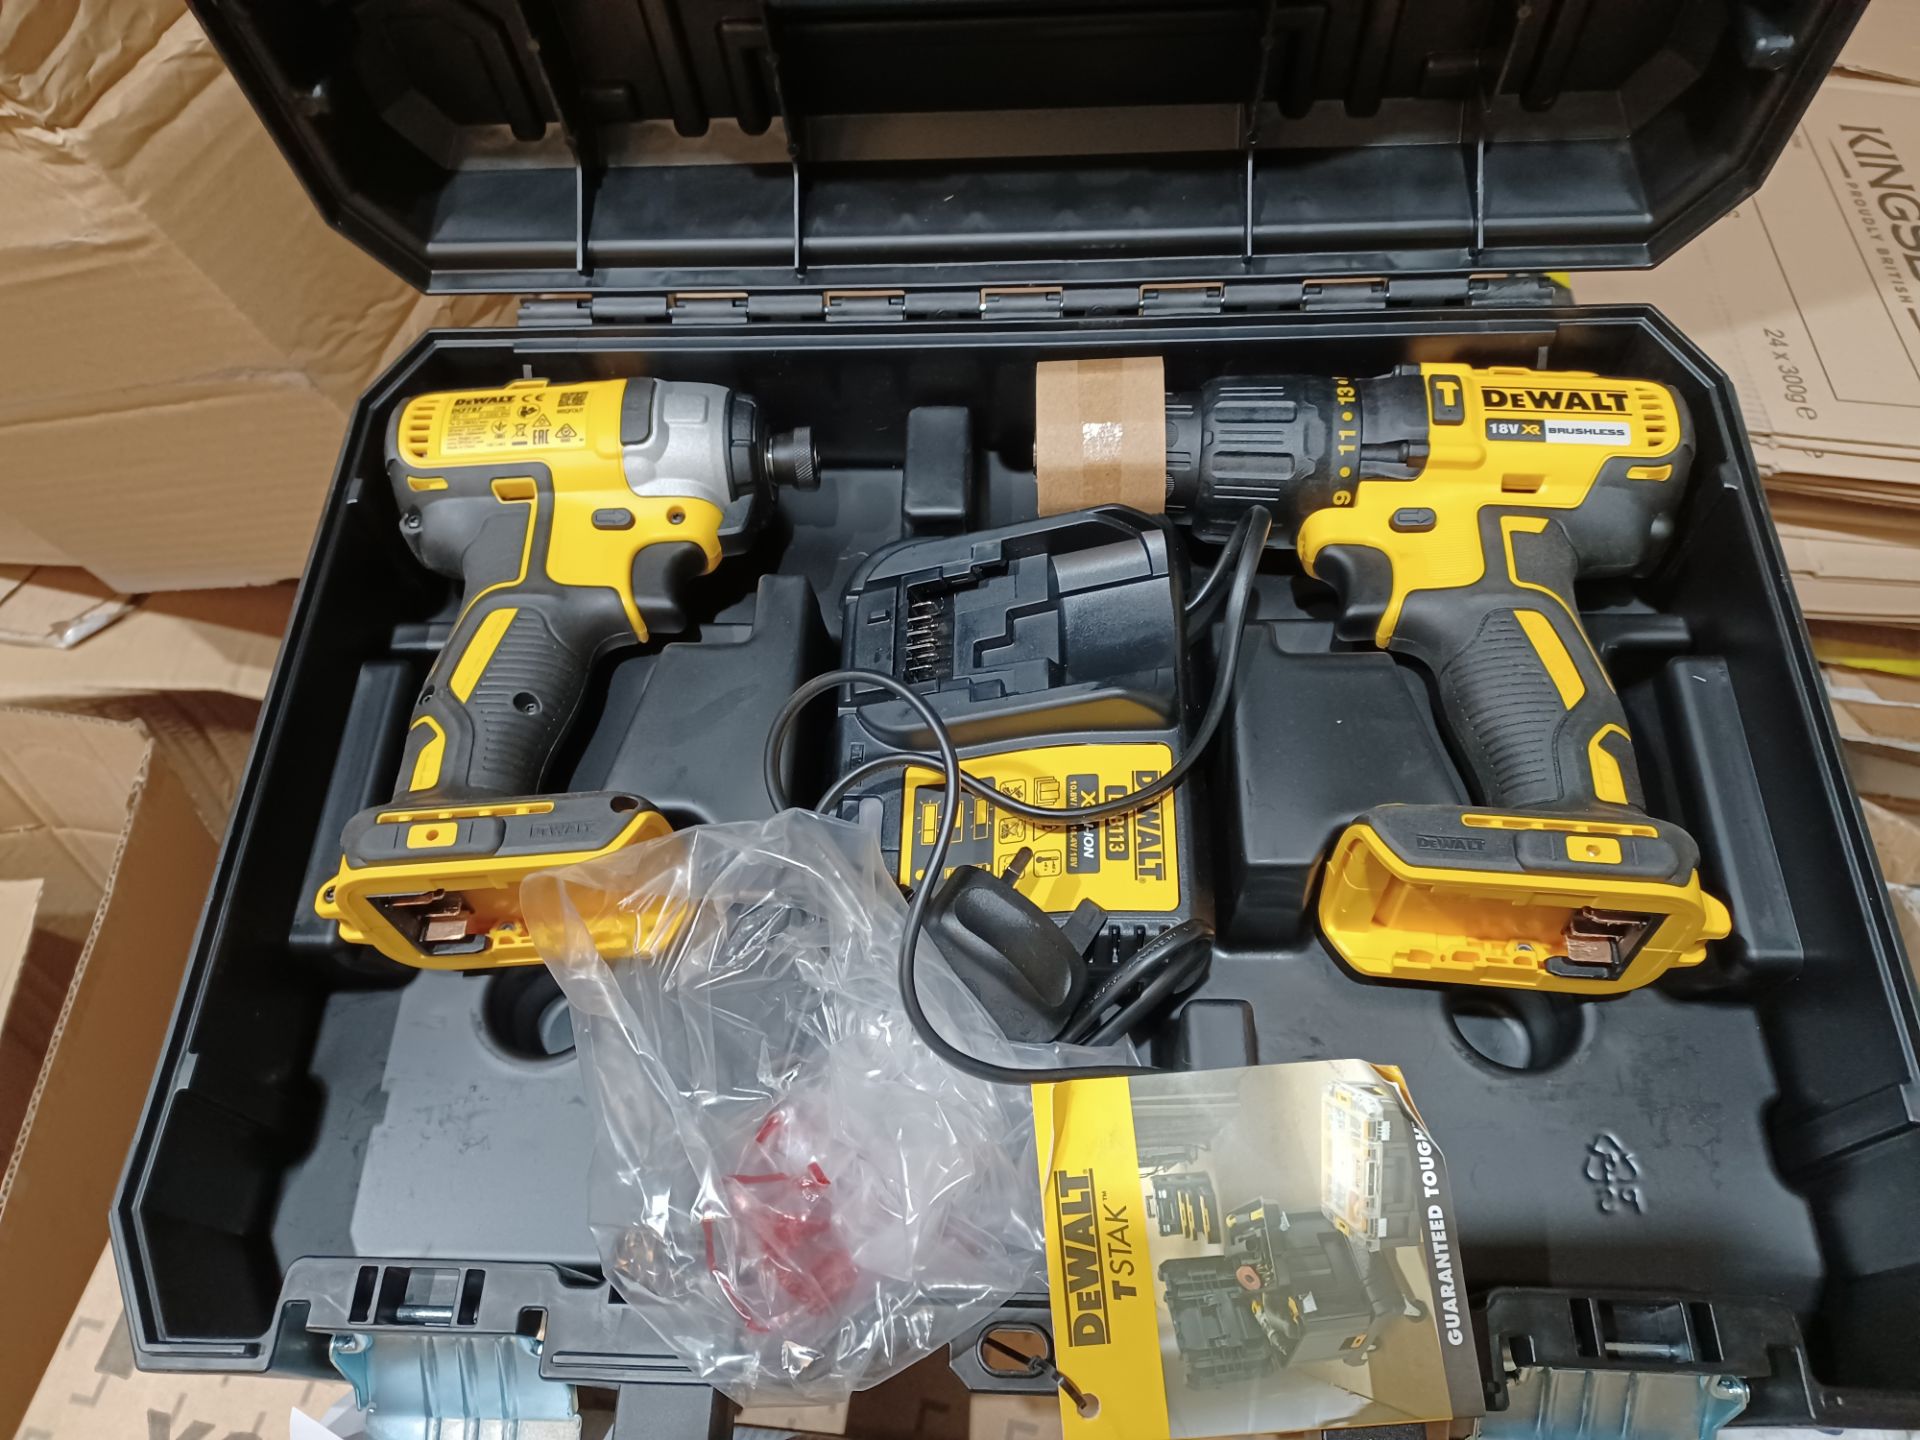 DEWALT DCK-SFGB 18V 4.0AH LI-ION XR BRUSHLESS CORDLESS TWIN PACK COMES WITH CHARGER AND CARRY CASE